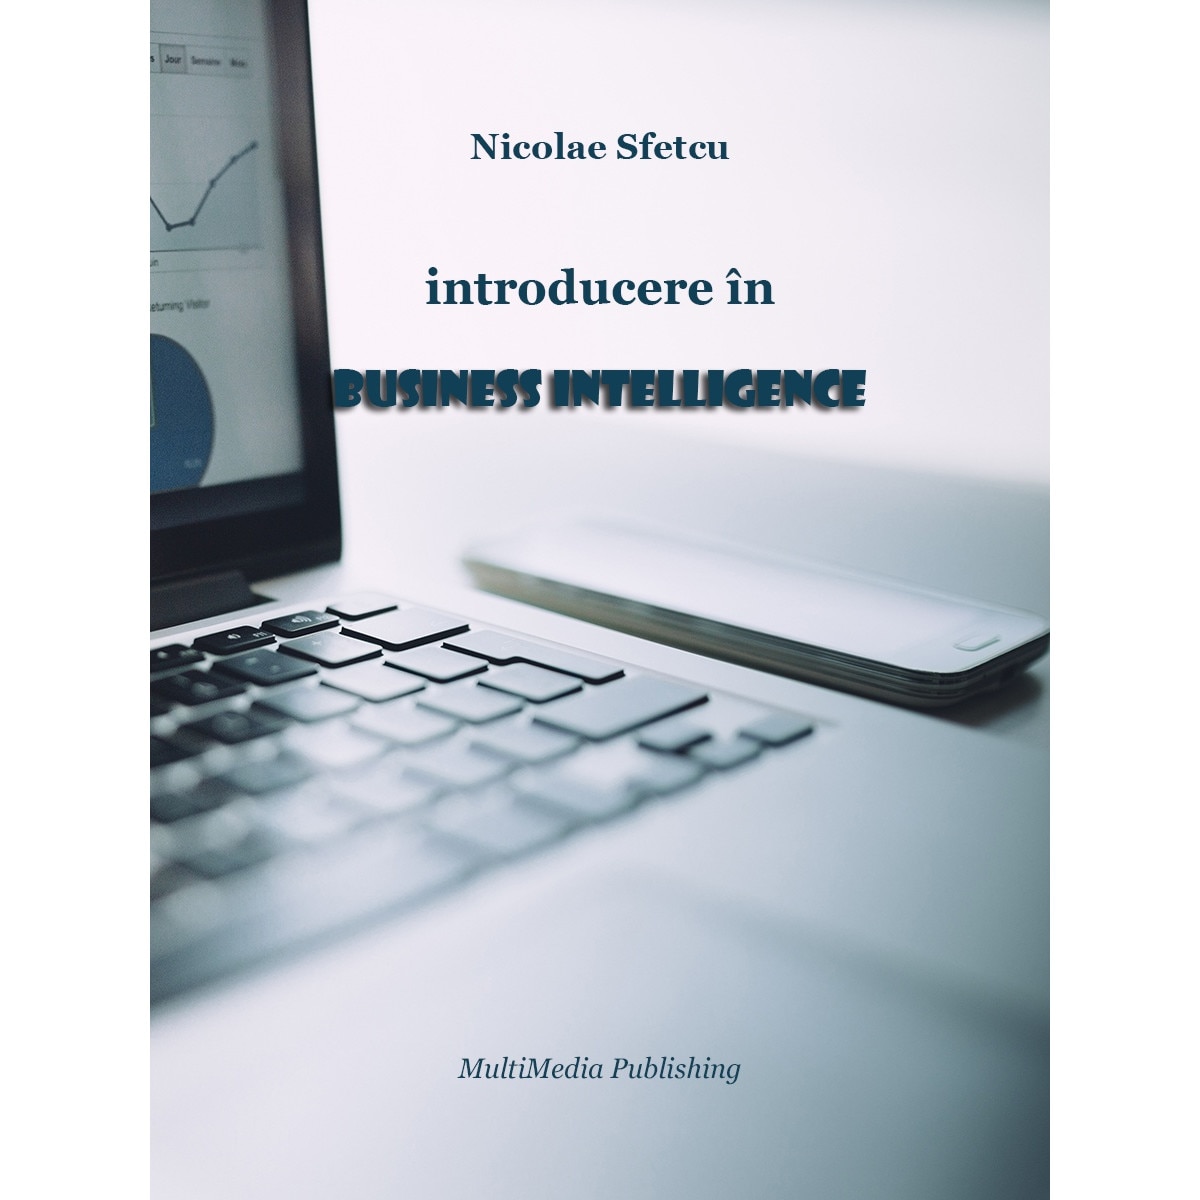 painter missile Unchanged Introducere in Business Intelligence, Nicolae Sfetcu, PDF - eMAG.ro